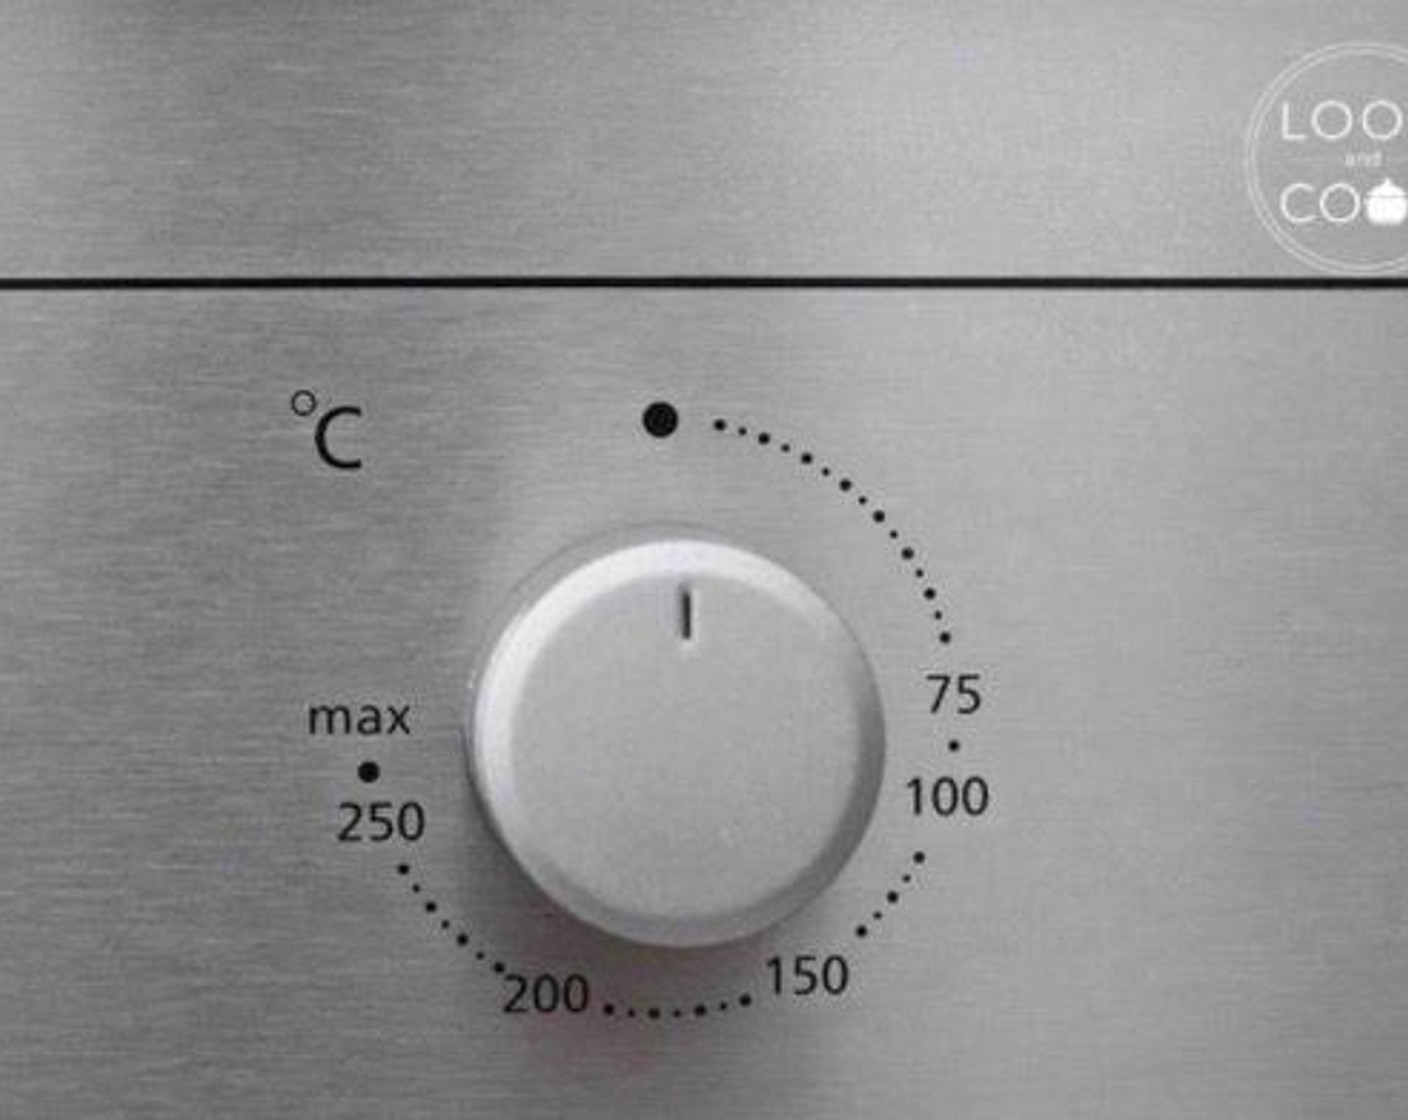 step 1 Preheat the oven to 160 degrees C (325 degrees F).